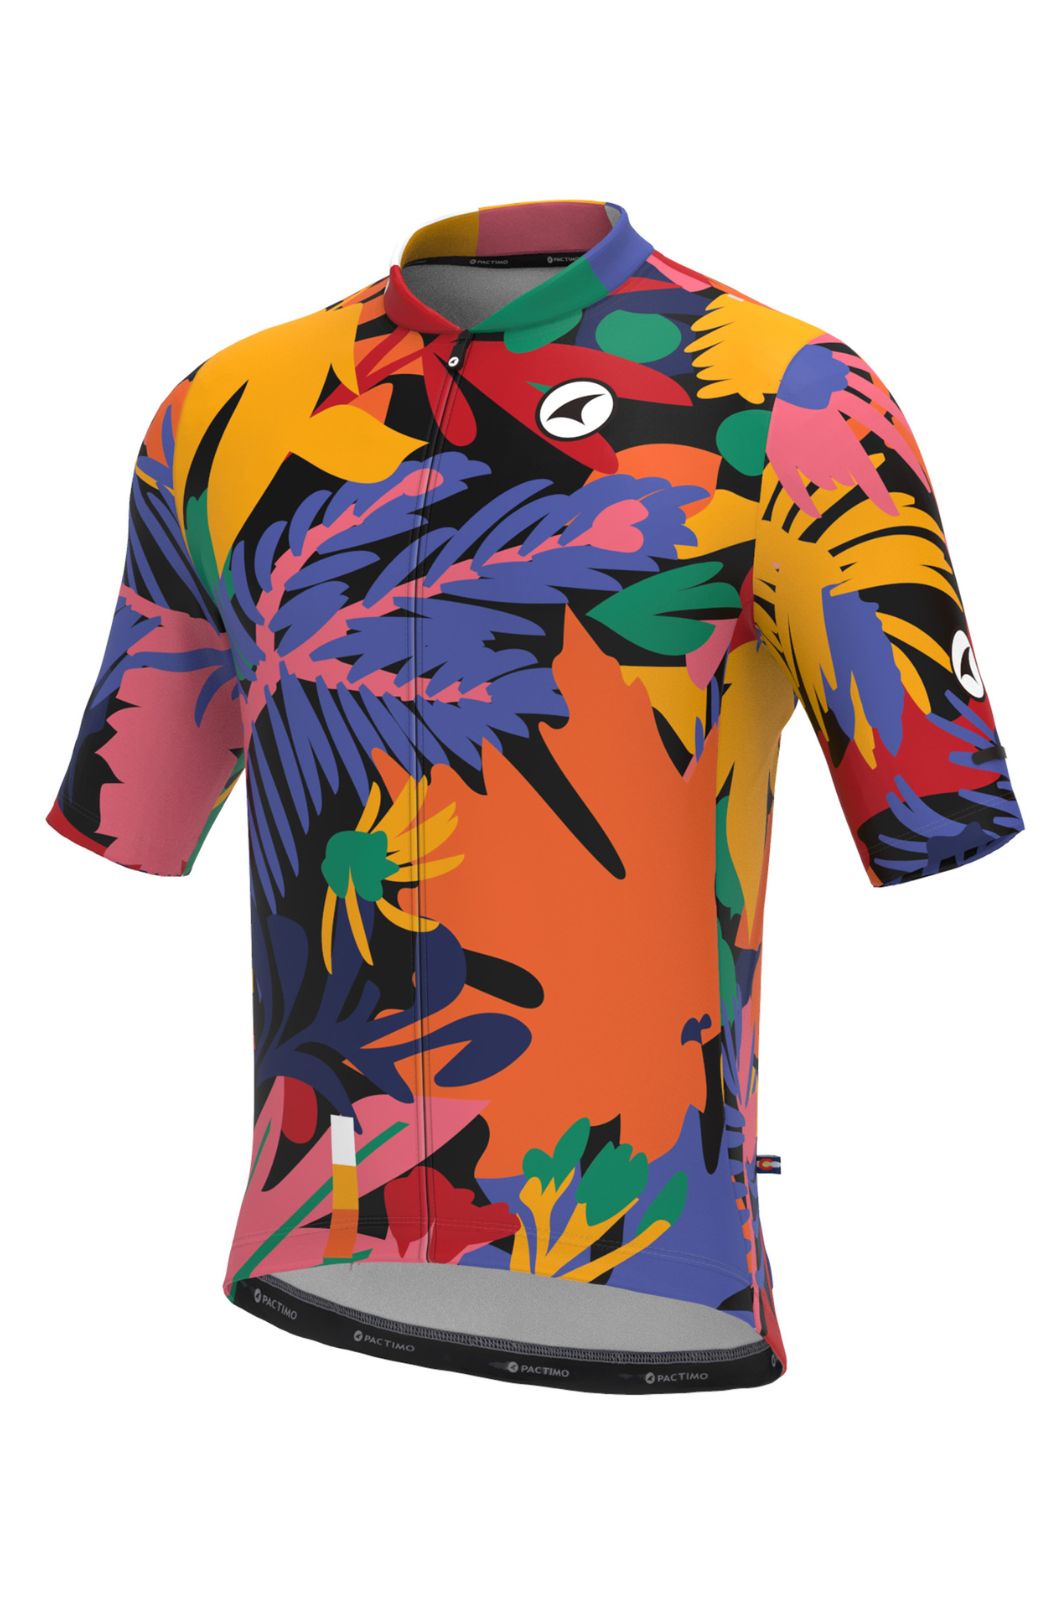 Unique Cycling Jerseys - Men's Colorado Botanical by Mariery Young